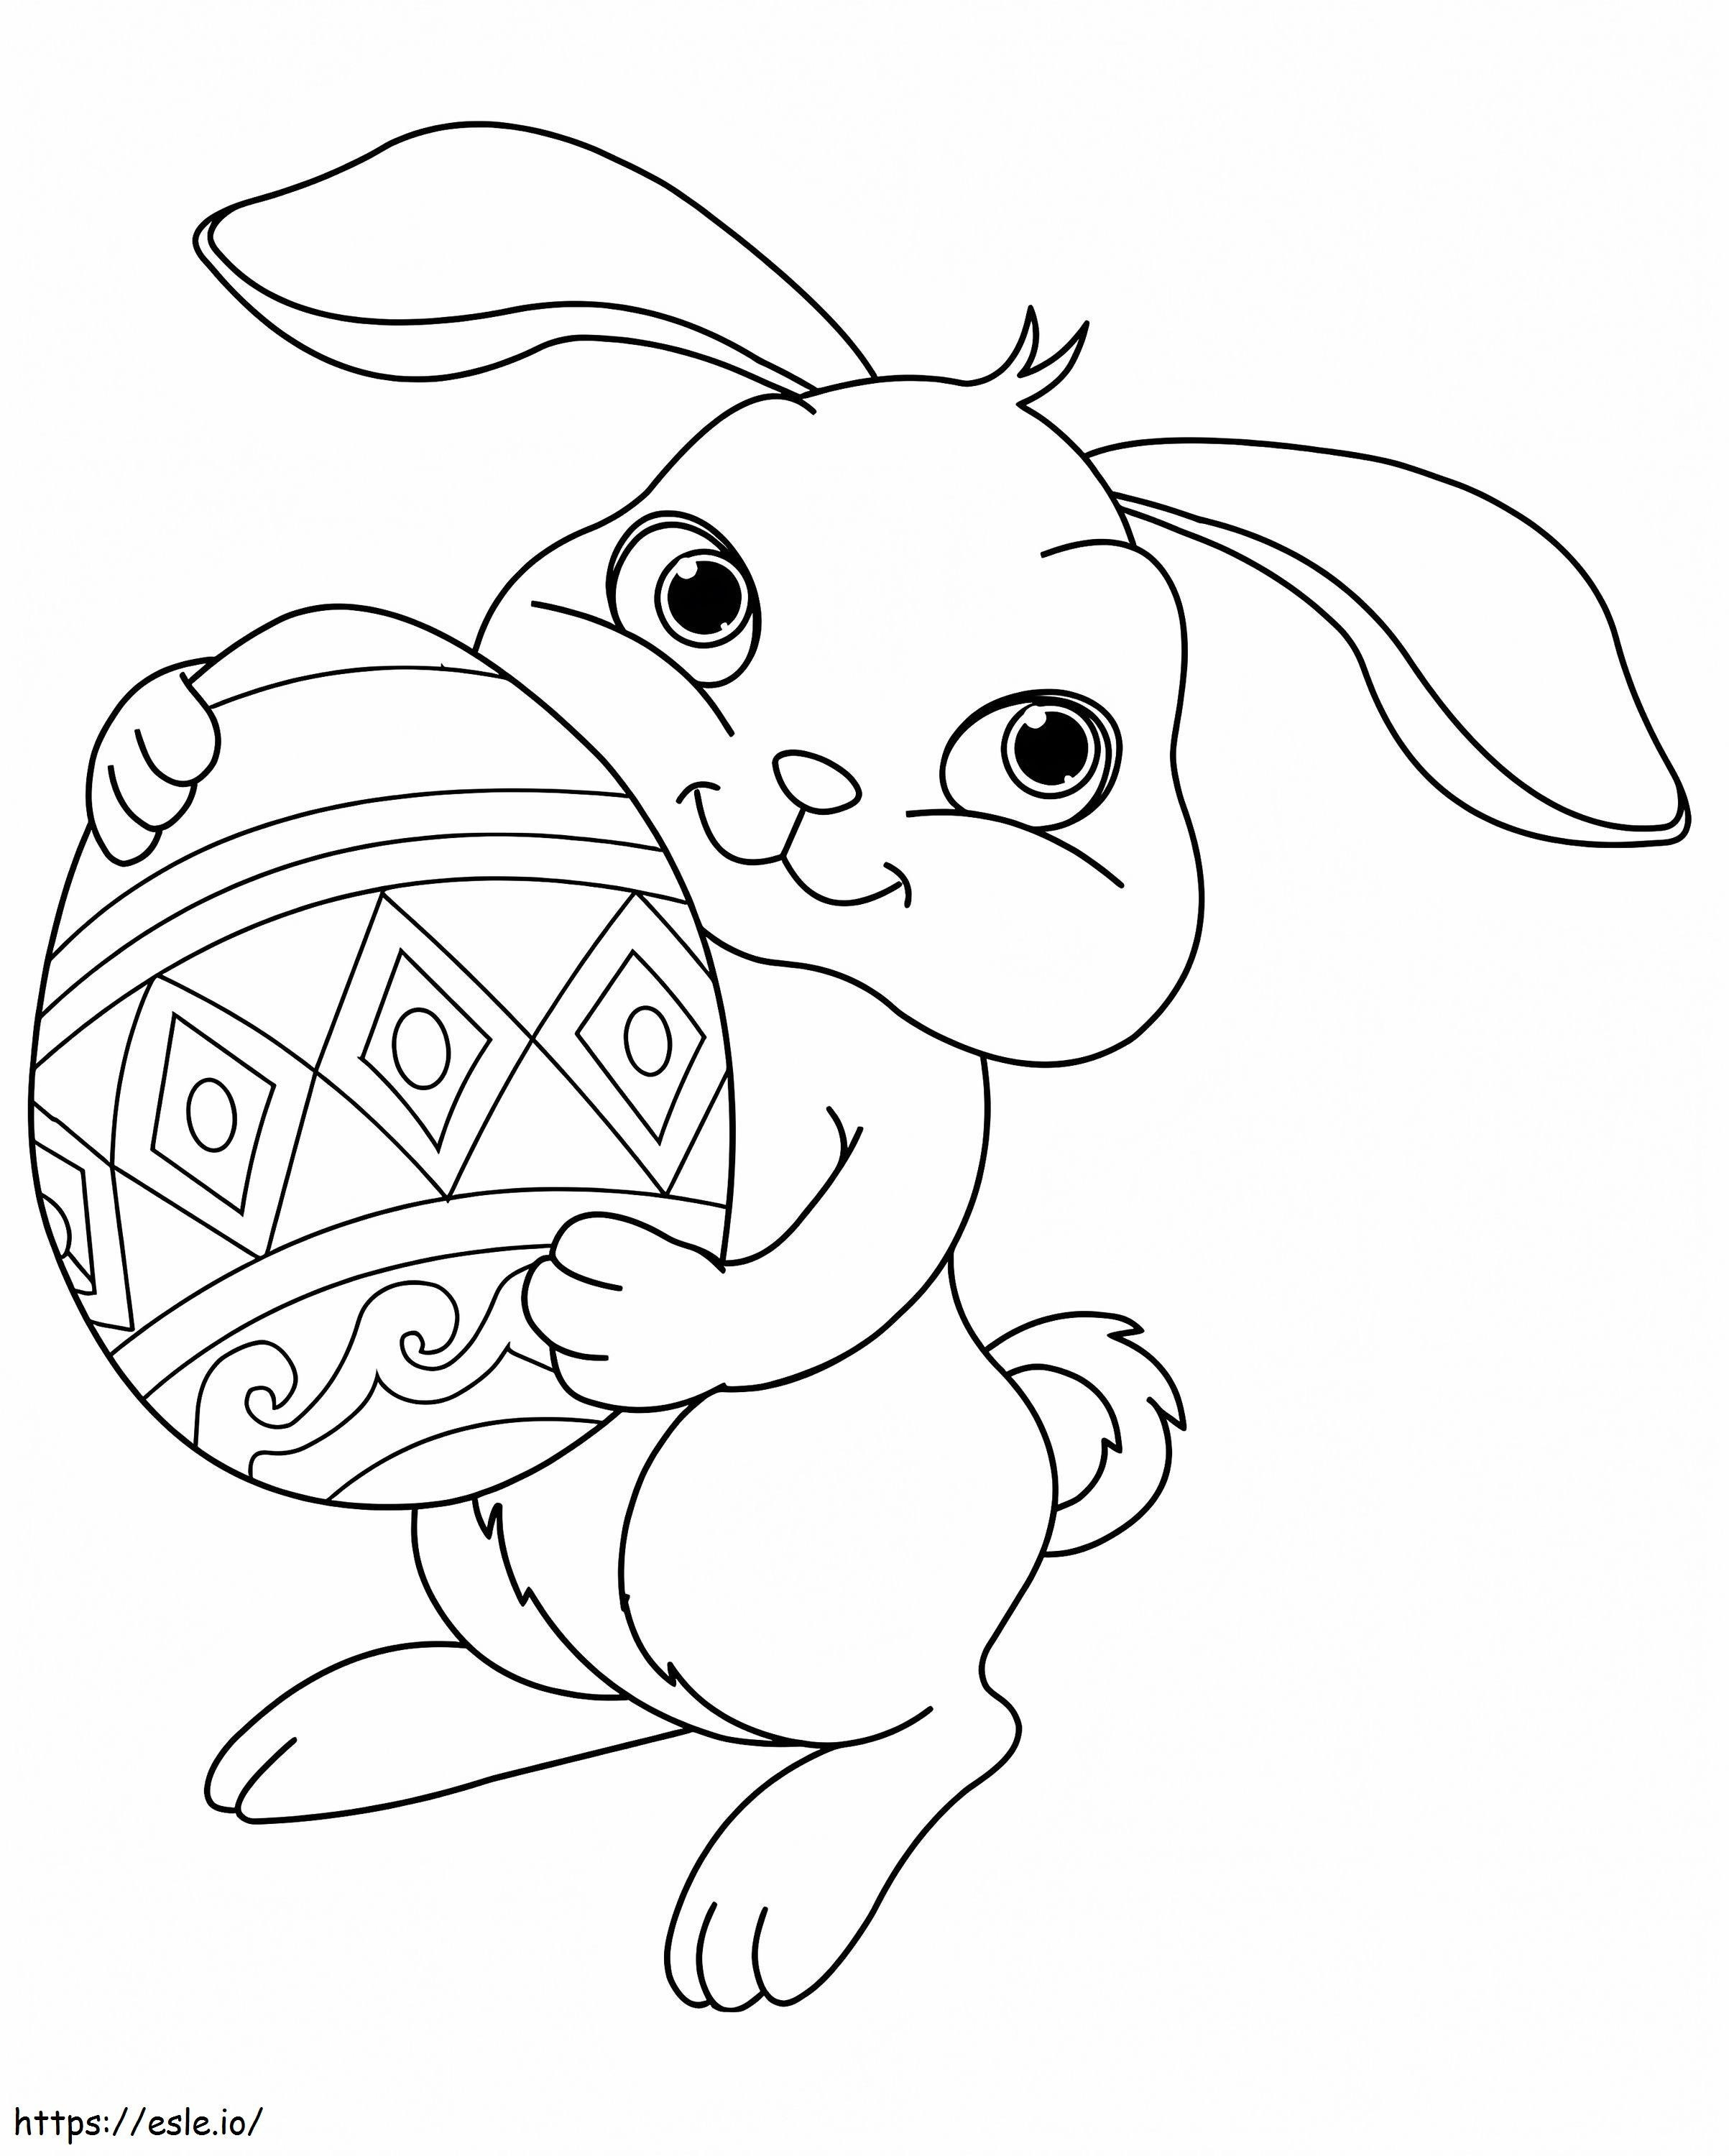 1582514580 Untitled coloring page